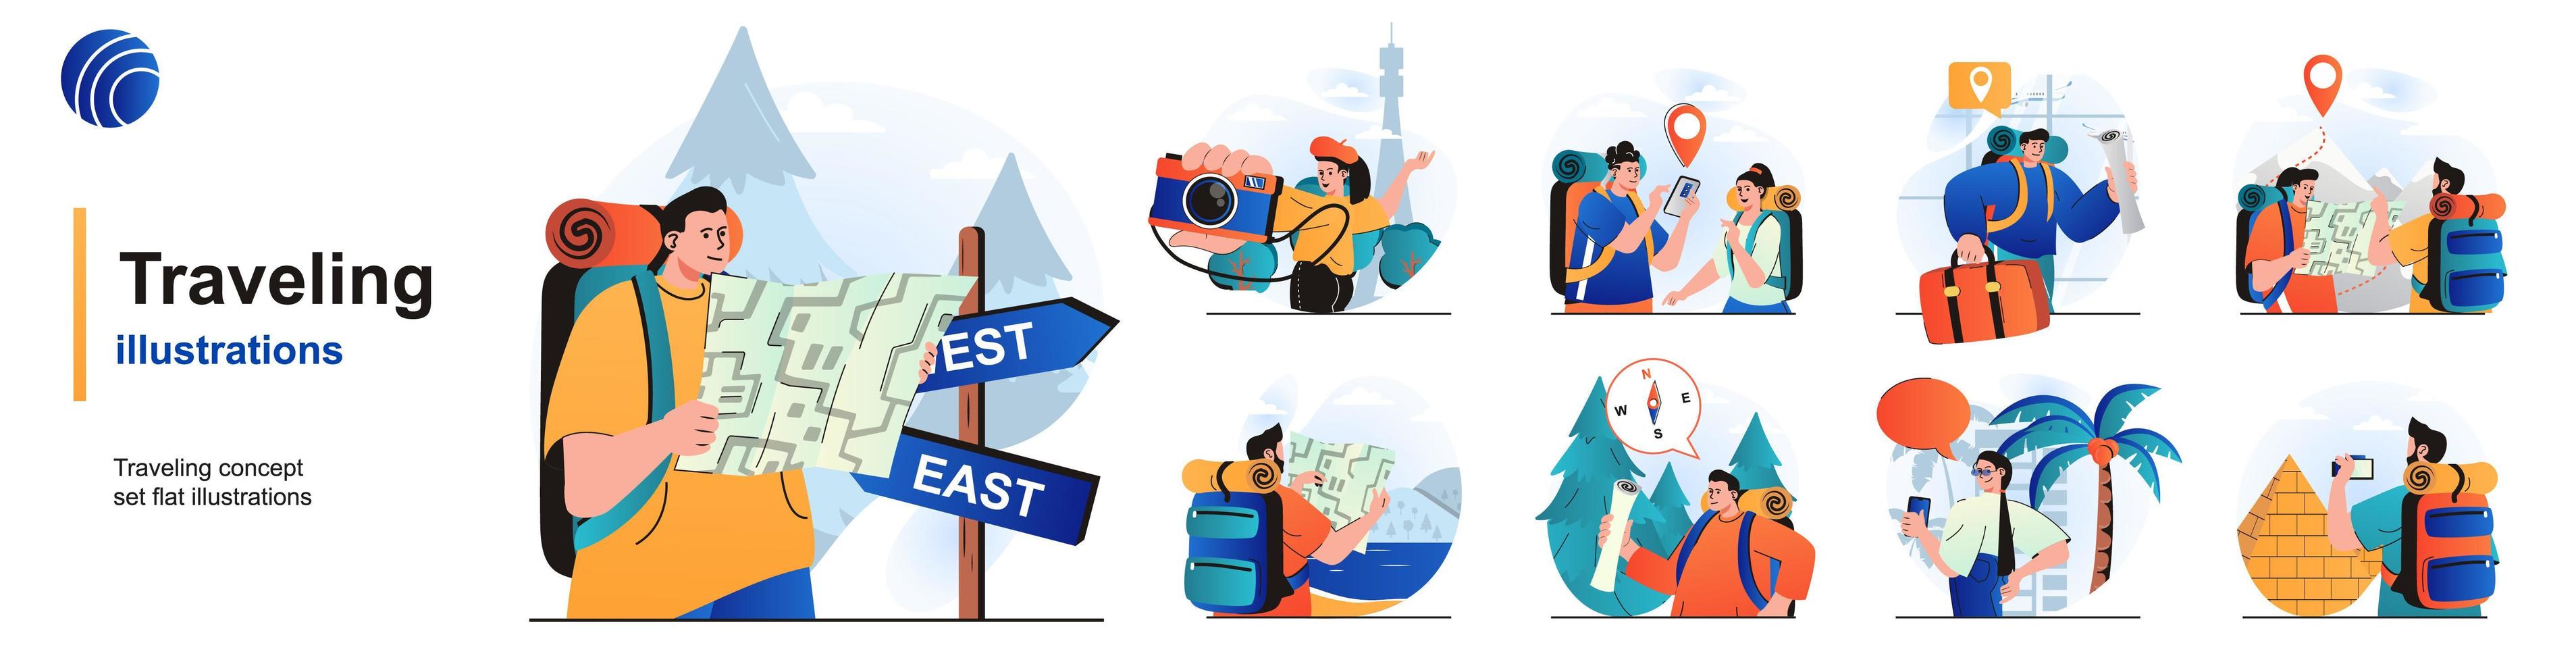 Traveling isolated set. Travelers on vacation, hiking, journey and adventure. People collection of scenes in flat design. Vector illustration for blogging, website, mobile app, promotional materials.